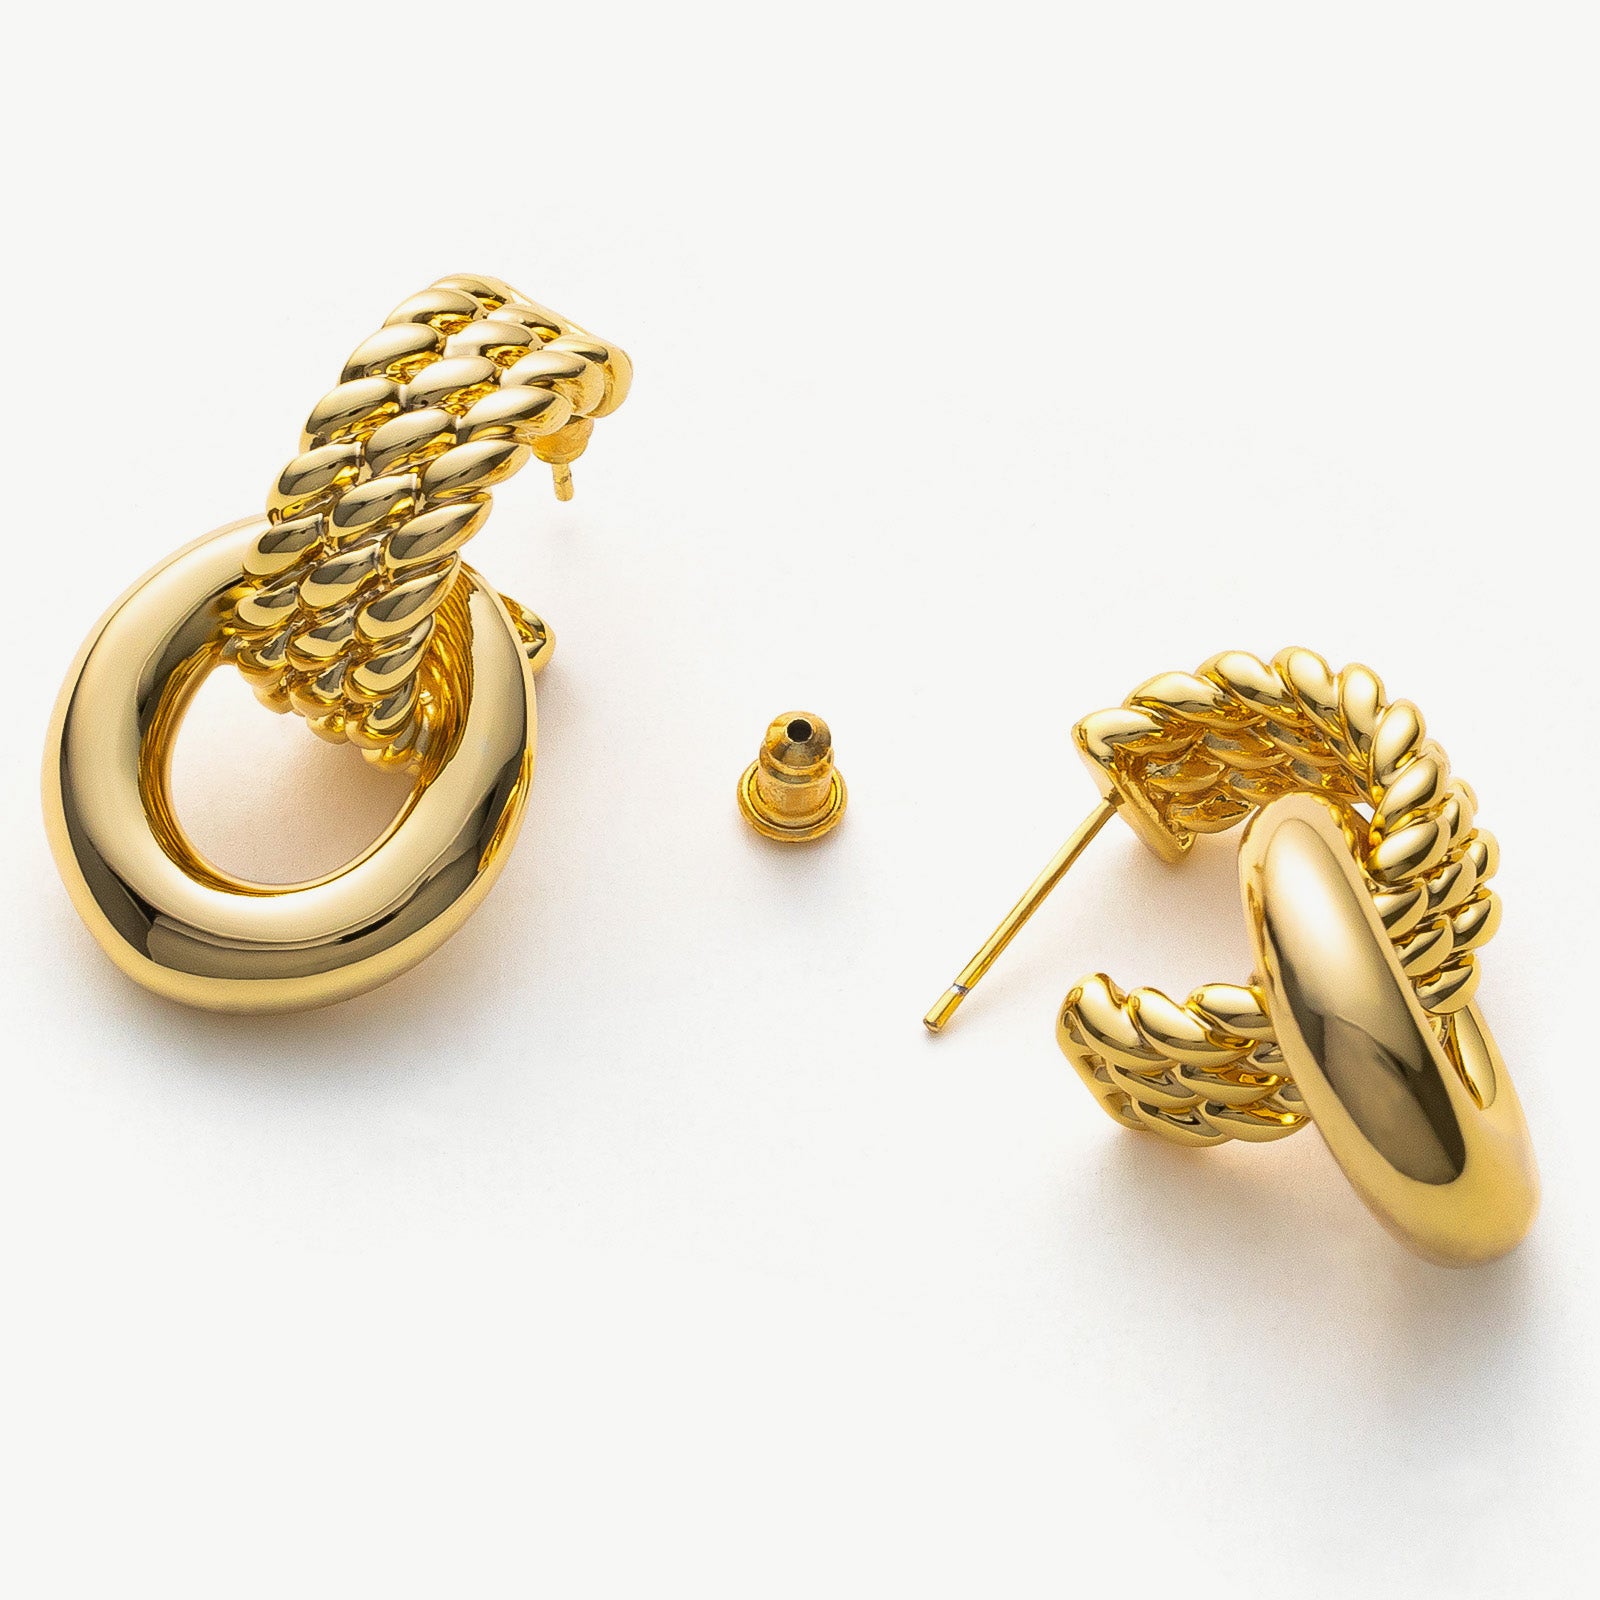 Ring Entwine Chunky Earrings featuring radiant gold circlets, these hoops offer a dynamic and eye-catching accessory, perfect for a bold and stylish appearance.